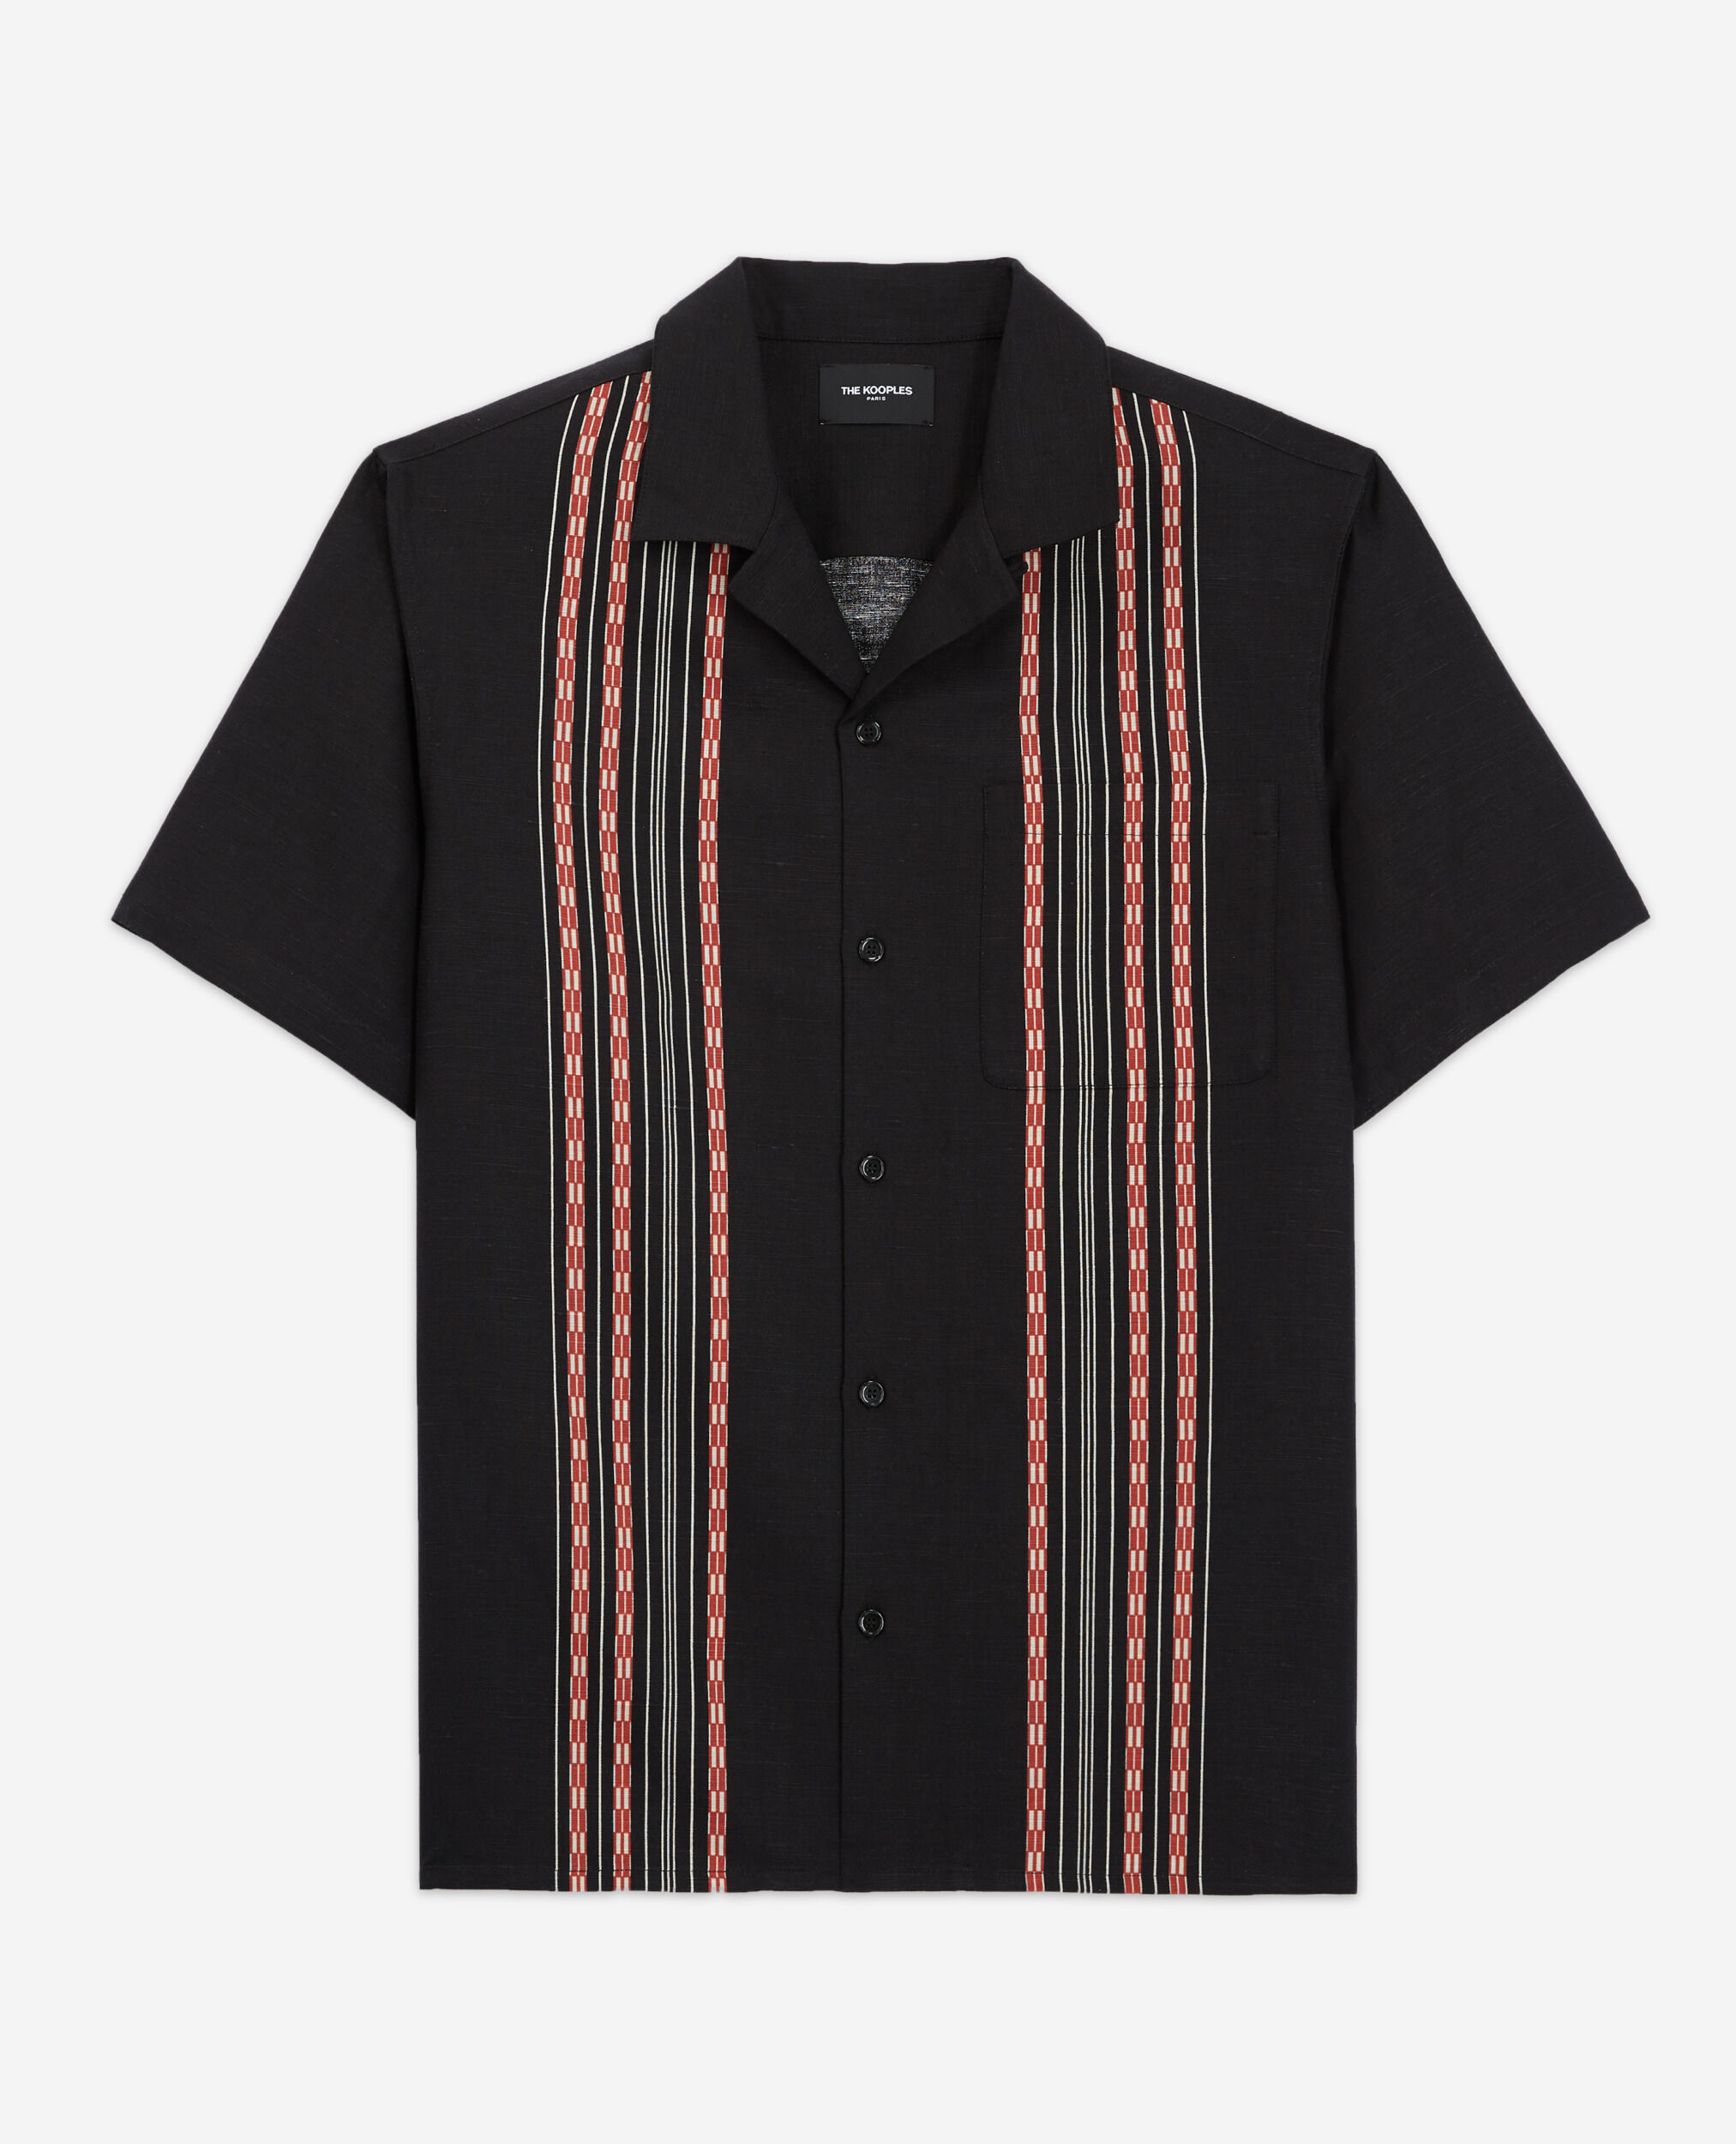 Patterned shirt with contrasting stripes, BLACK - RED, hi-res image number null